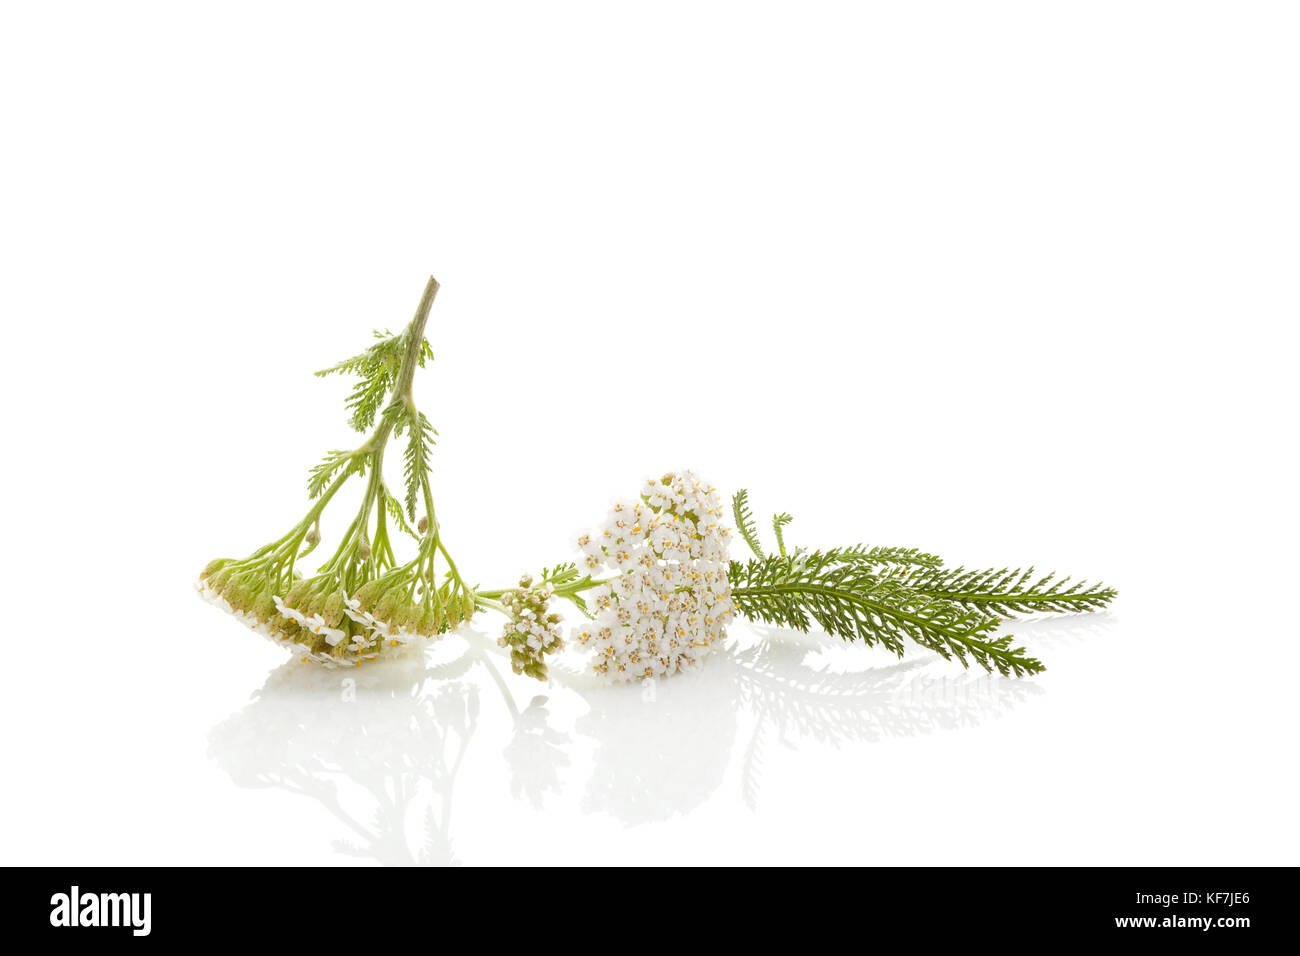 Achillea plant isolated on white background with reflection. Yarrow, bloodwort, allheal. Stock Photo